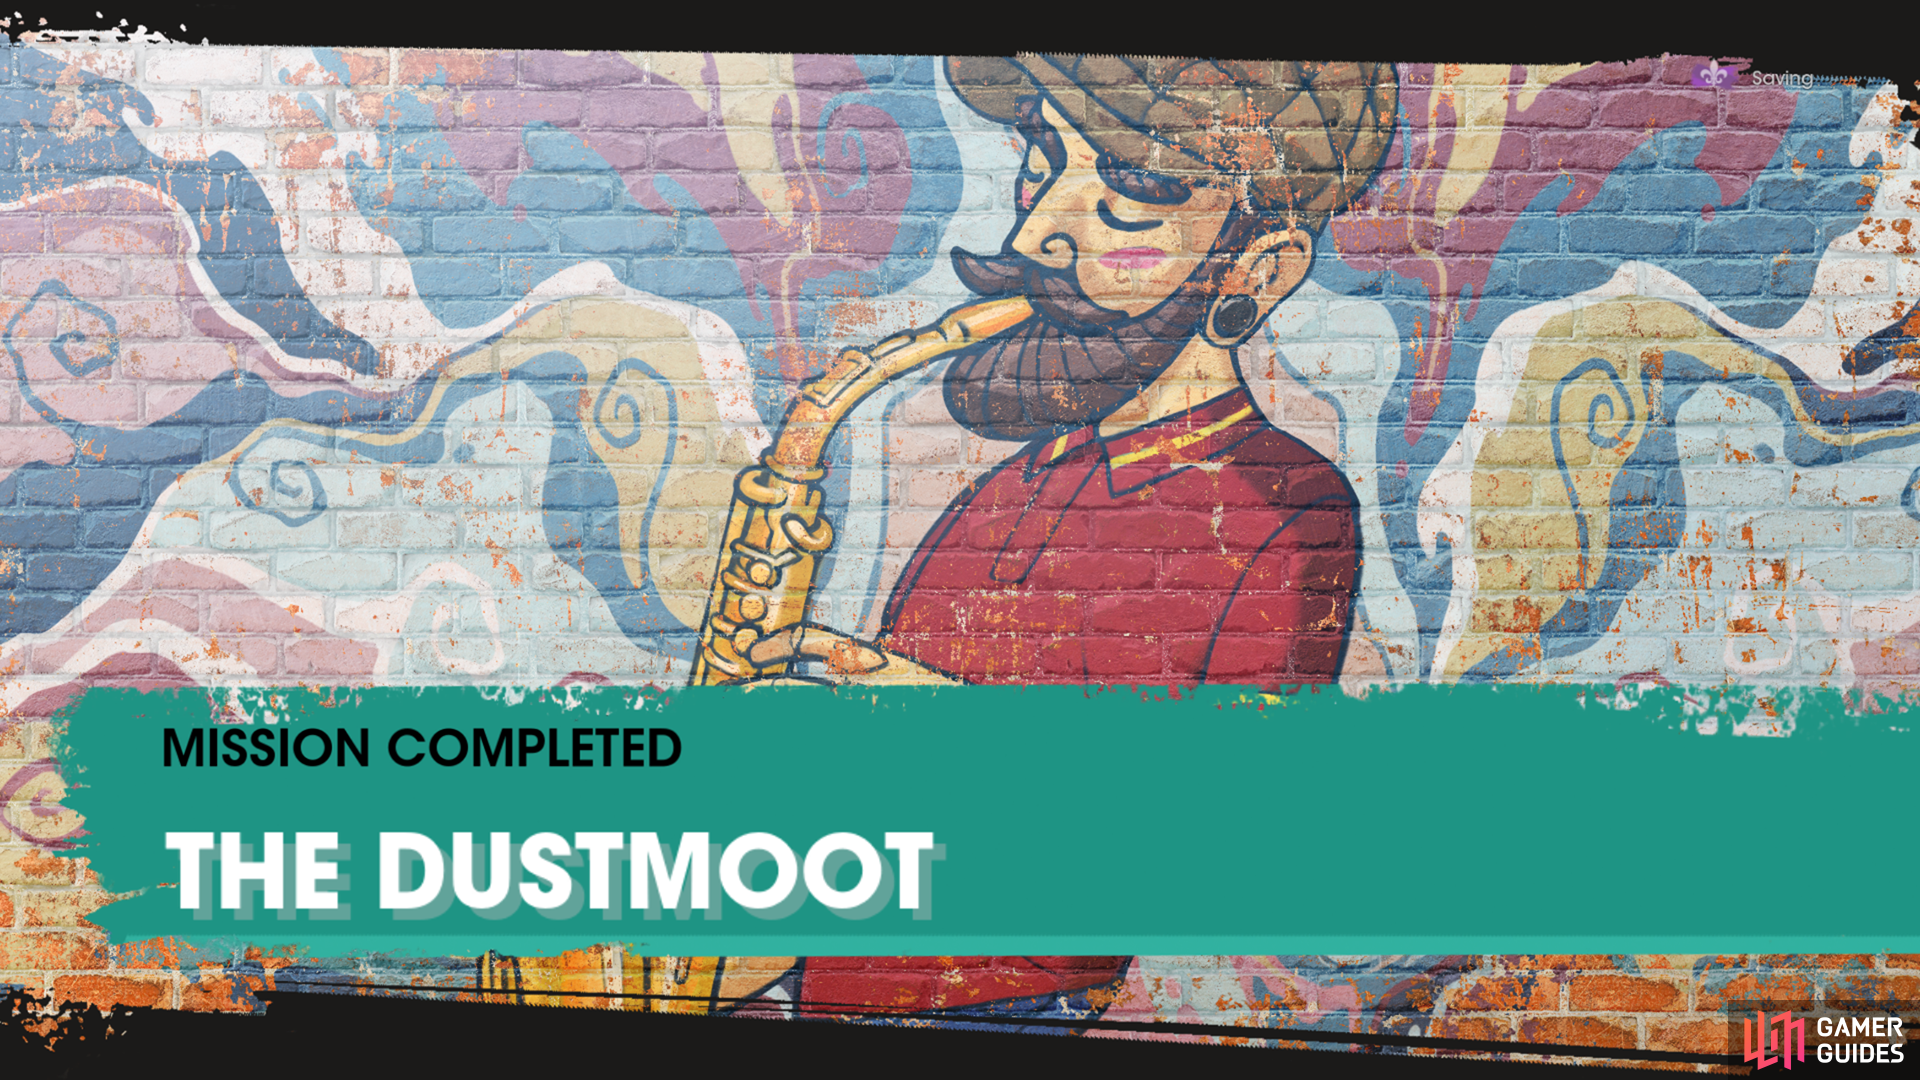 The Dustmoot is just the first of Saint Row’s Dustlander missions. More can be unlocked.